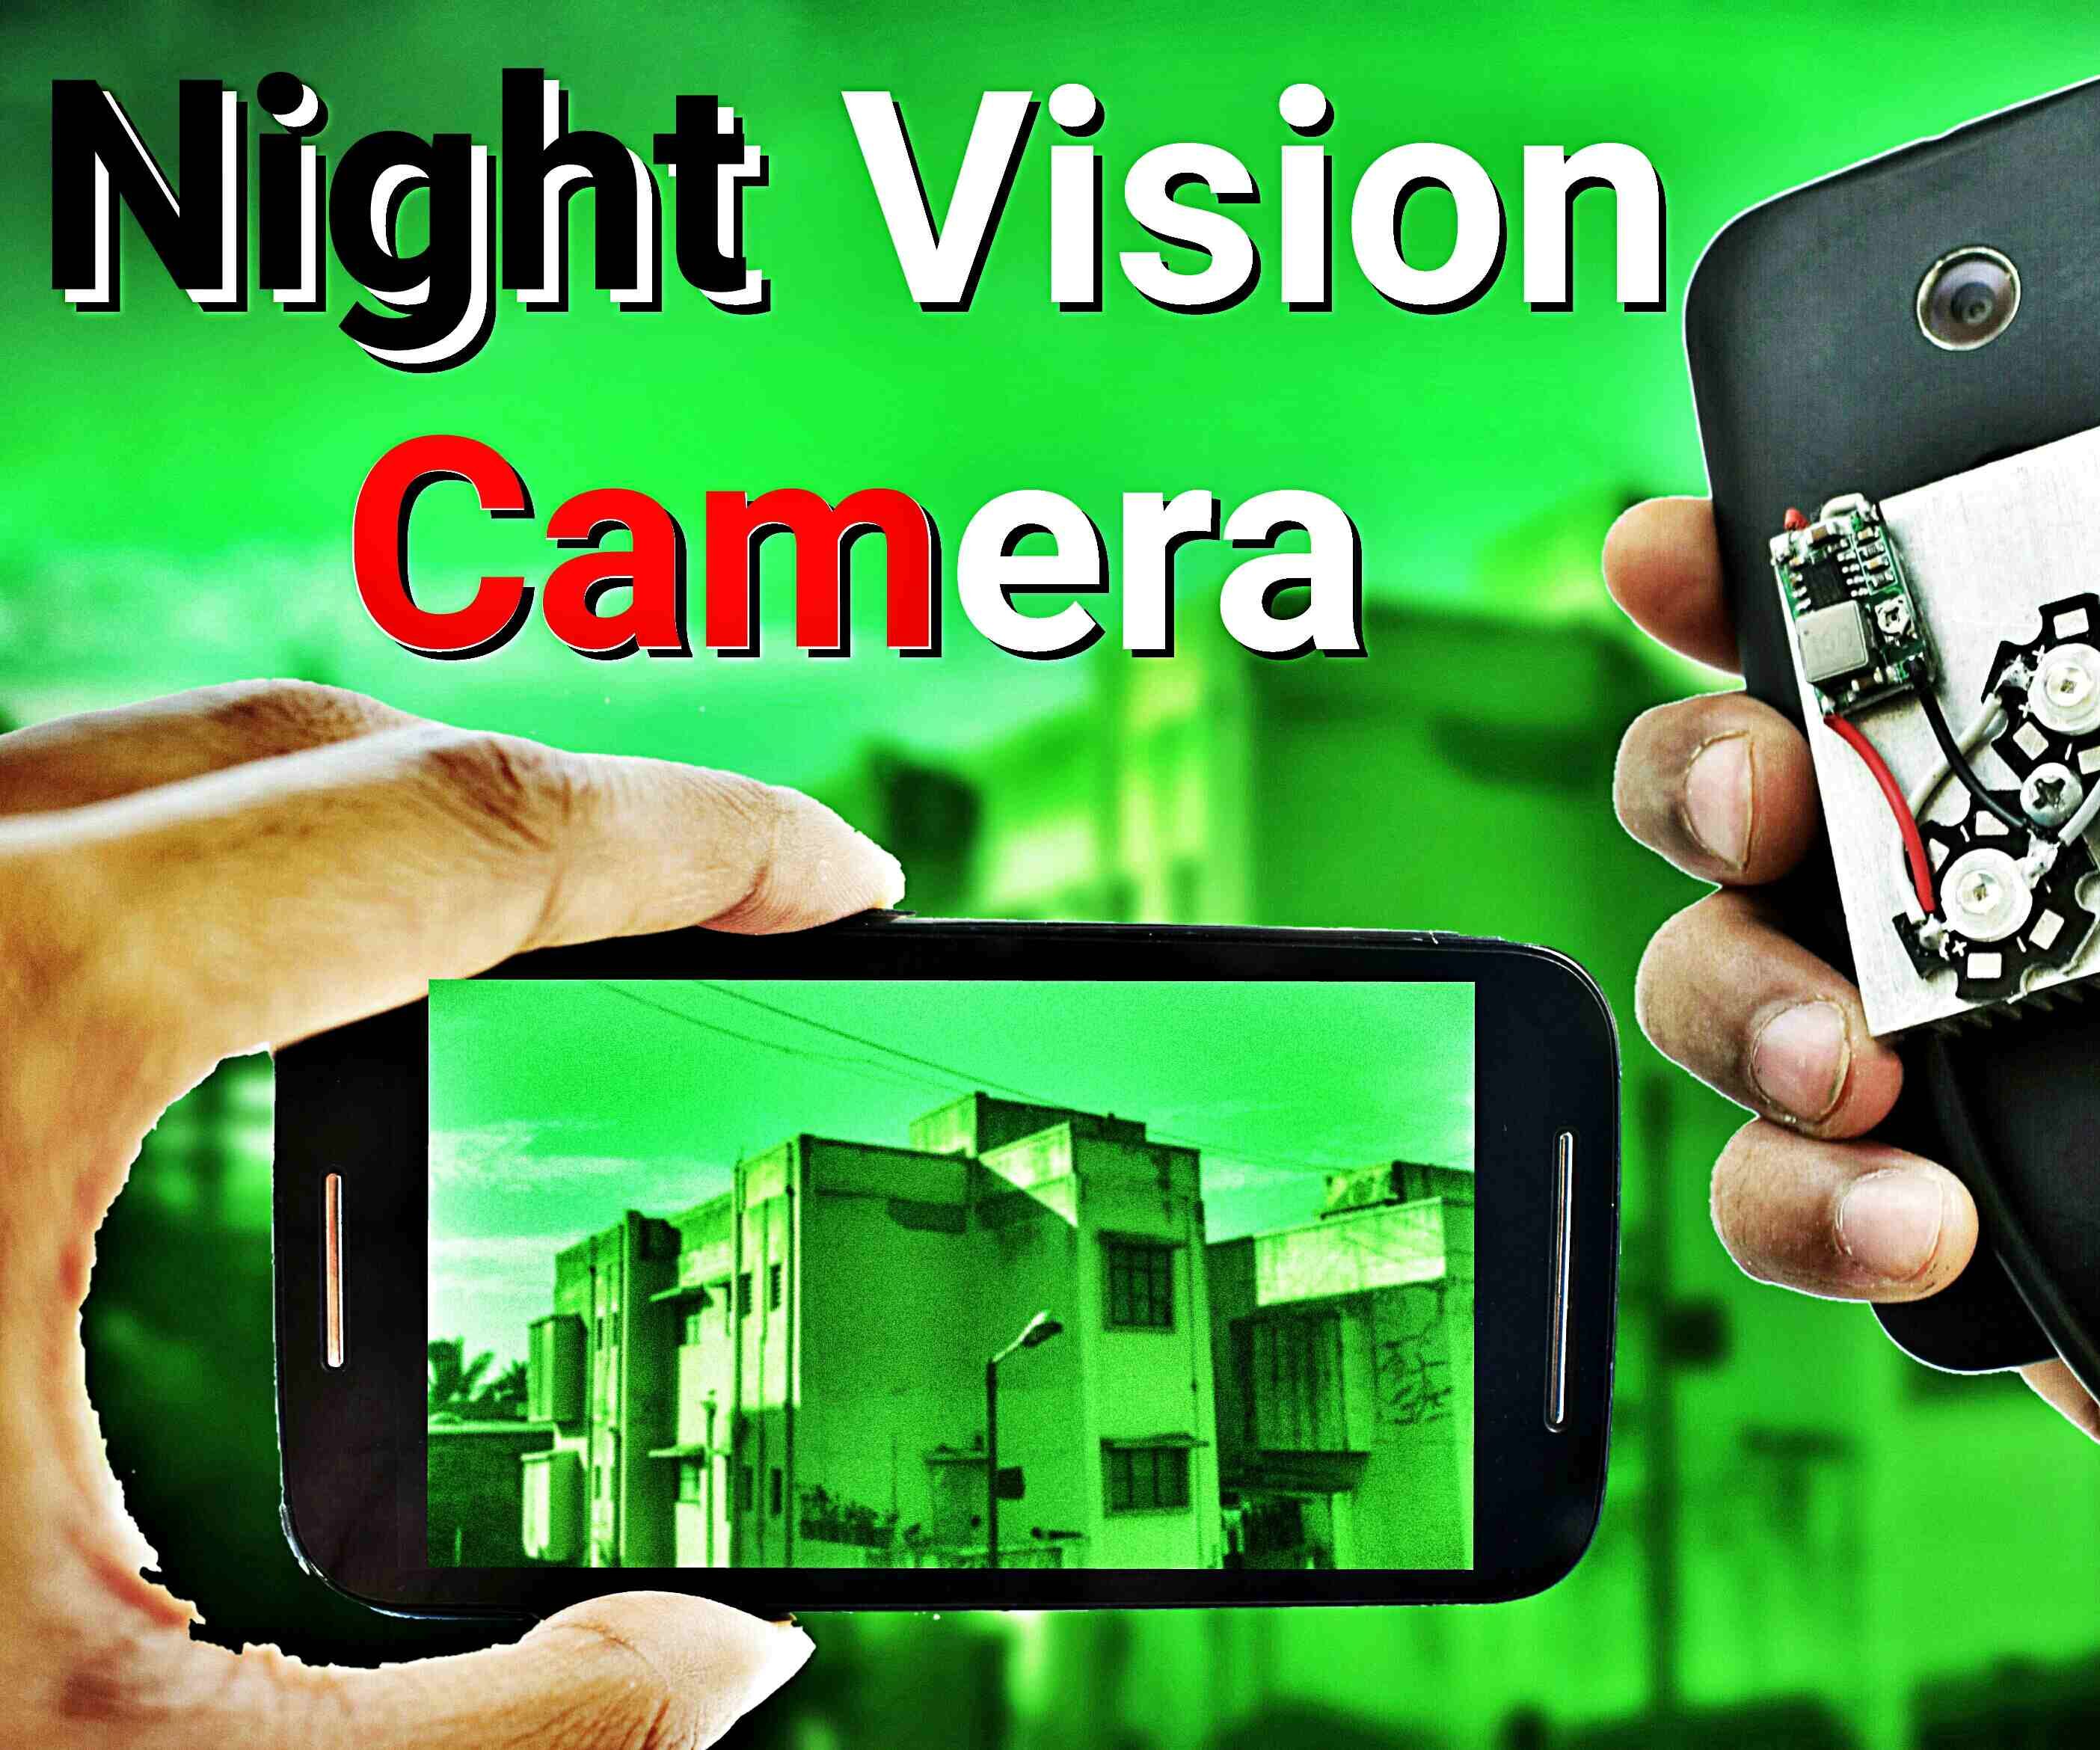 Make Night Vision Camera From Old Smartphone !